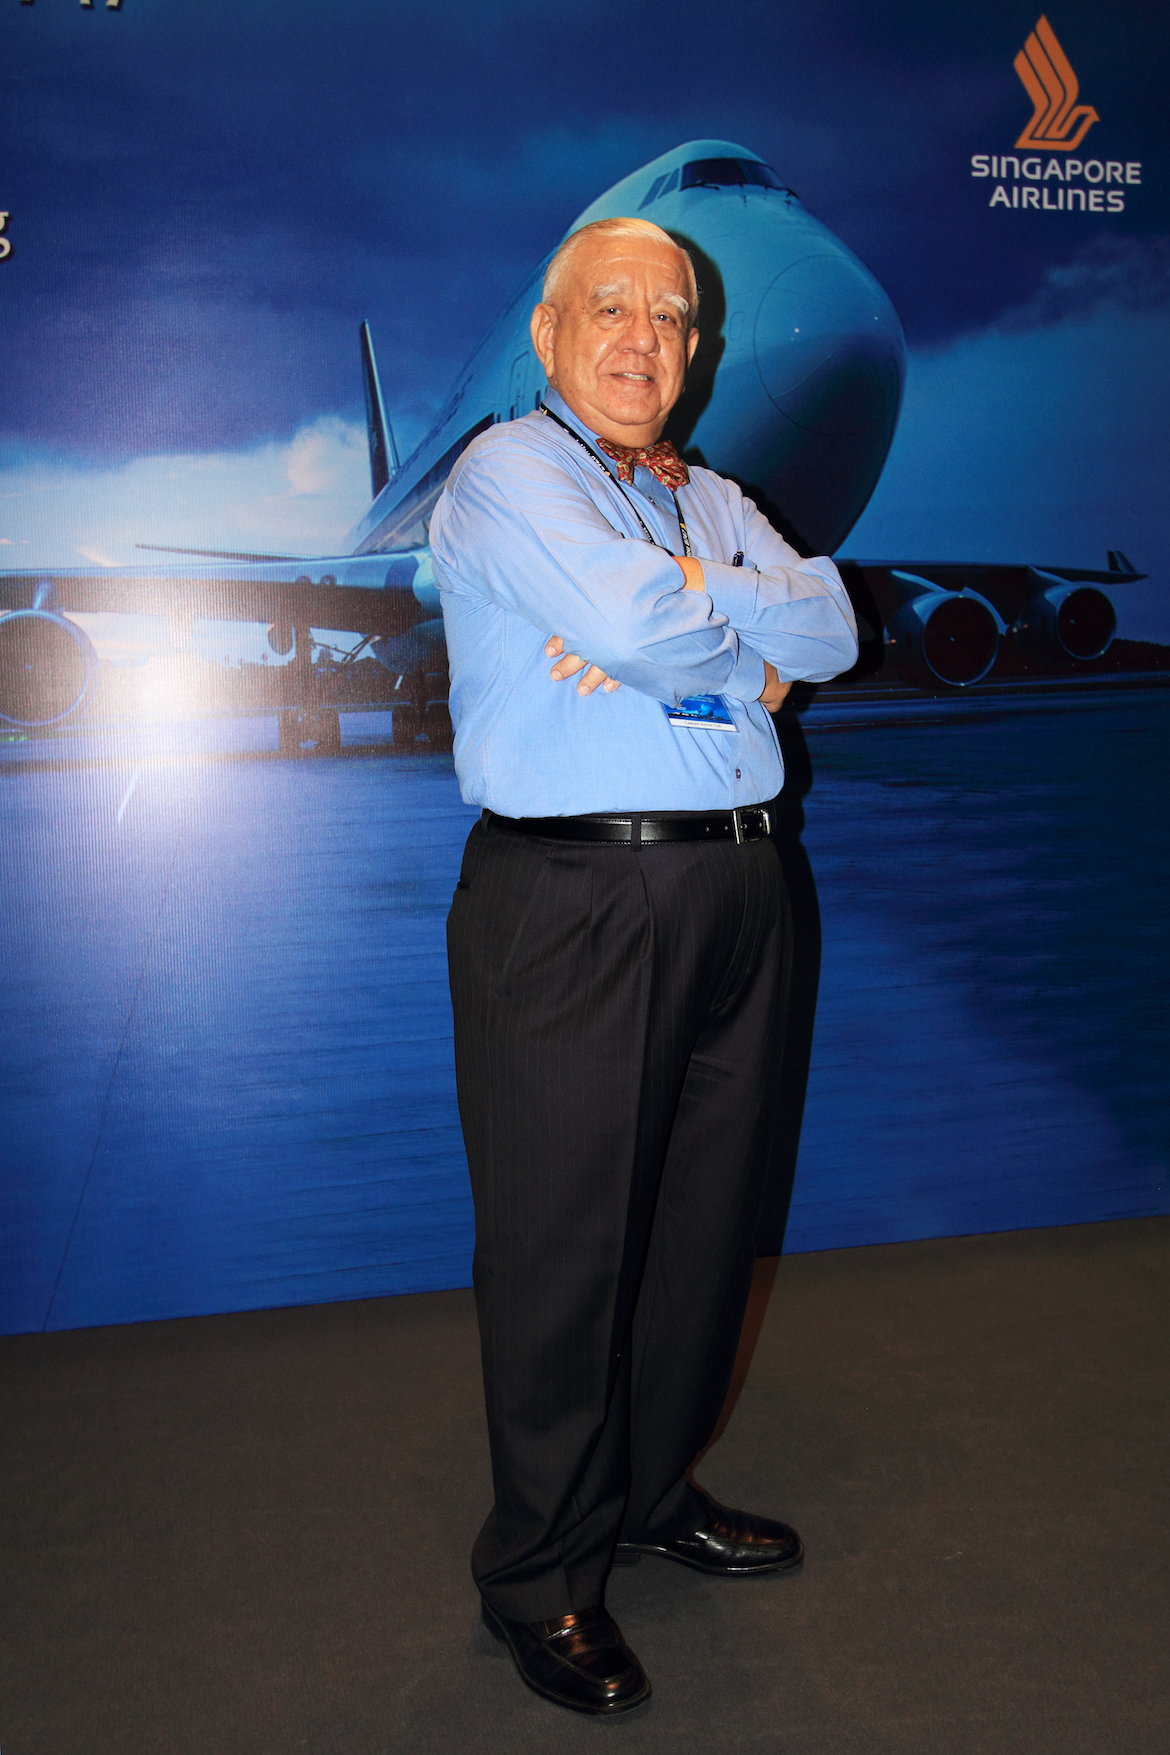 Singapore Airline’s first 747 pilot, retired Captain Kenneth Toft.